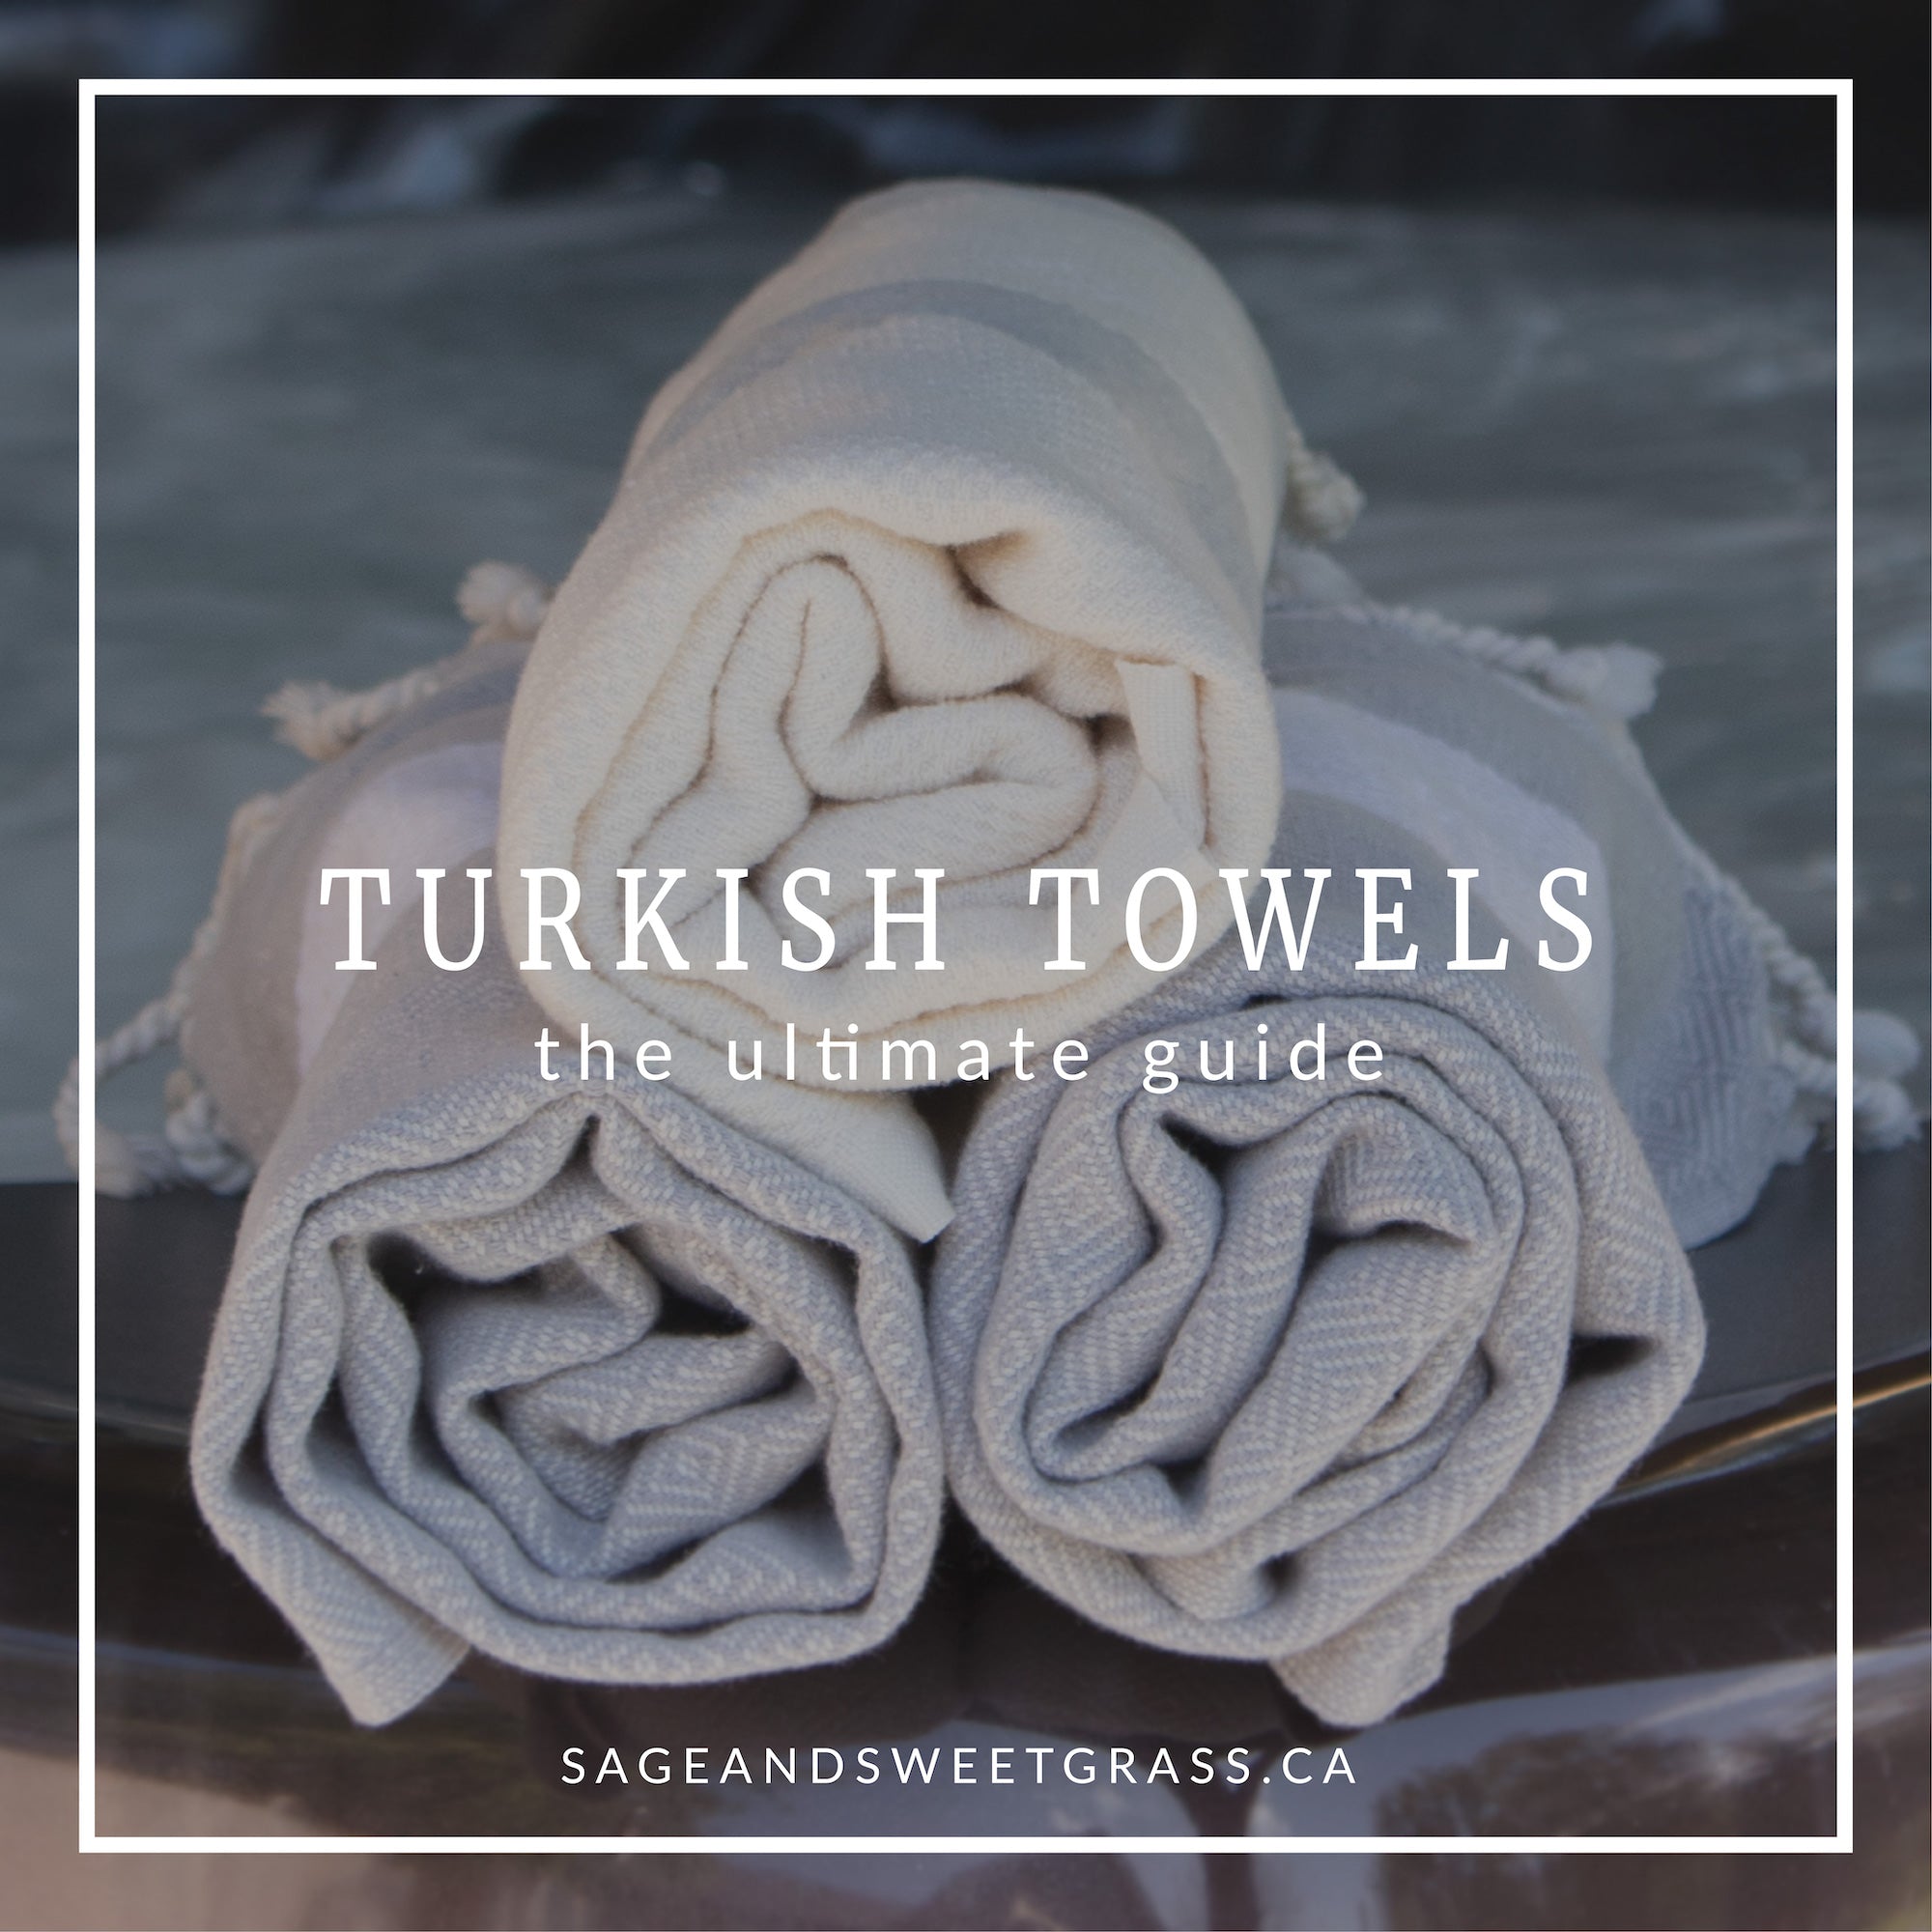 The Ultimate Guide to our Turkish Towels